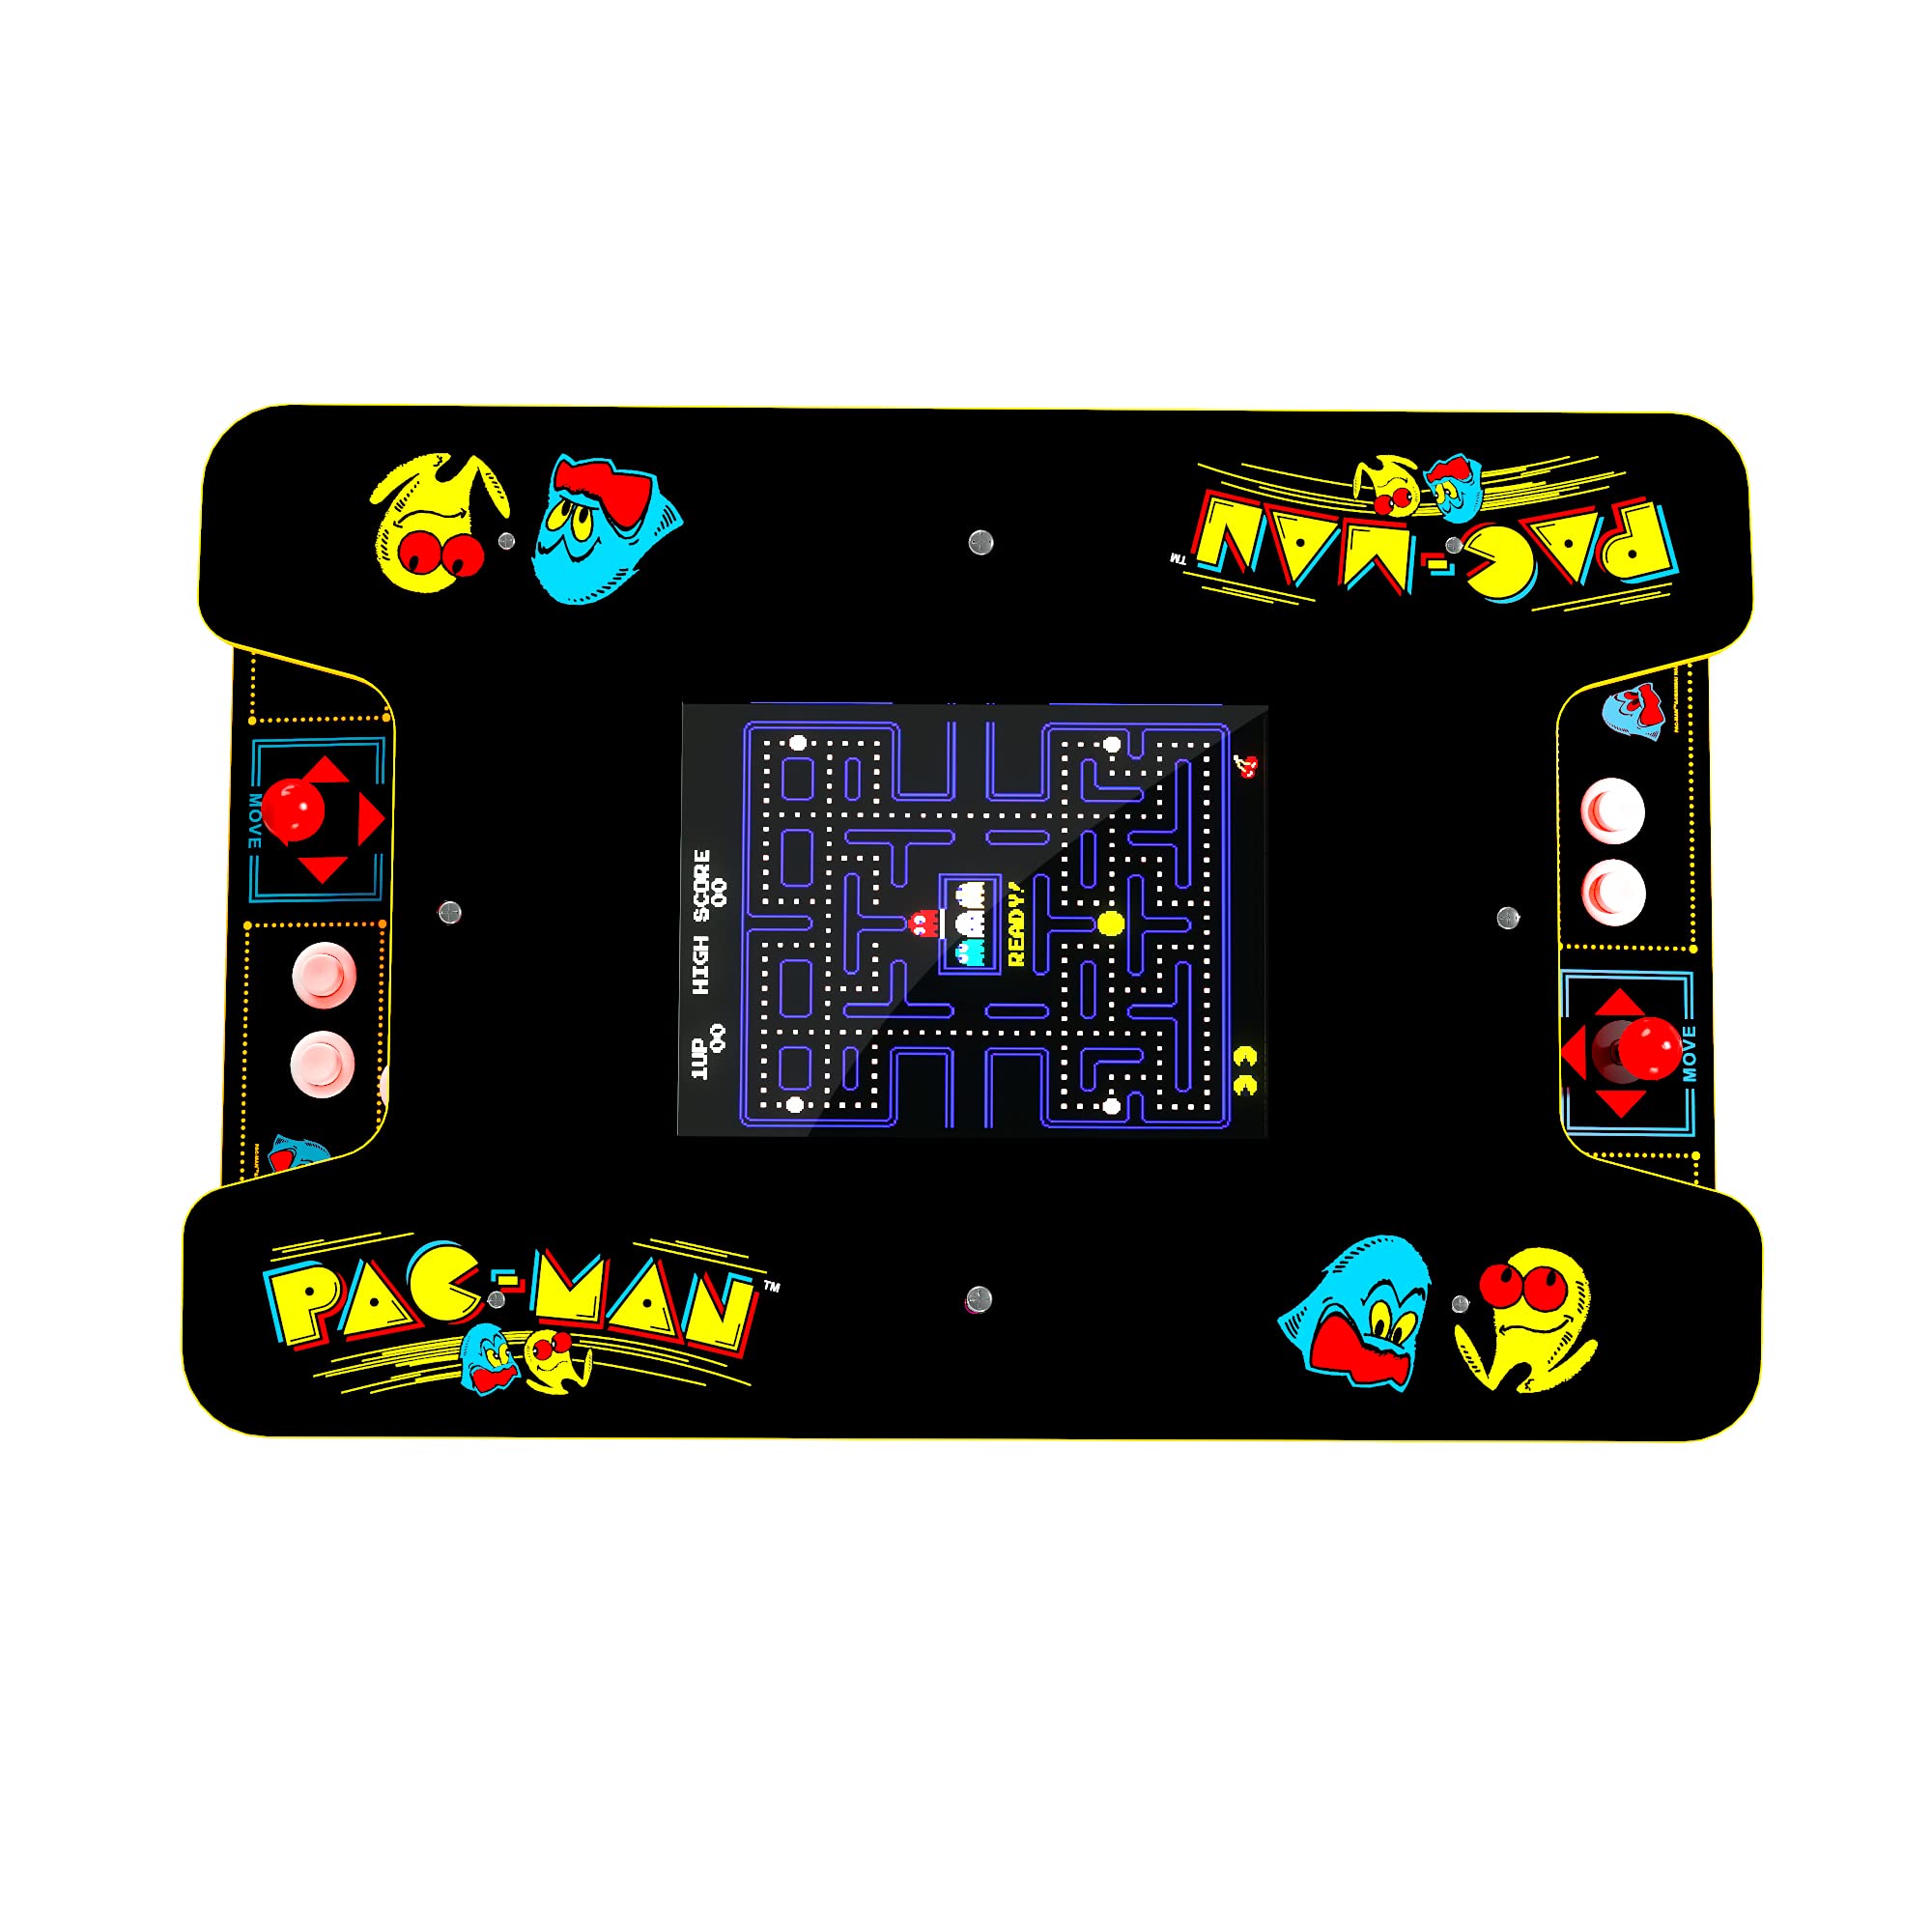 Arcade 1Up Arcade1Up PAC-MAN Head-to-Head Arcade Table - Black Series Edition - Electronic Games;